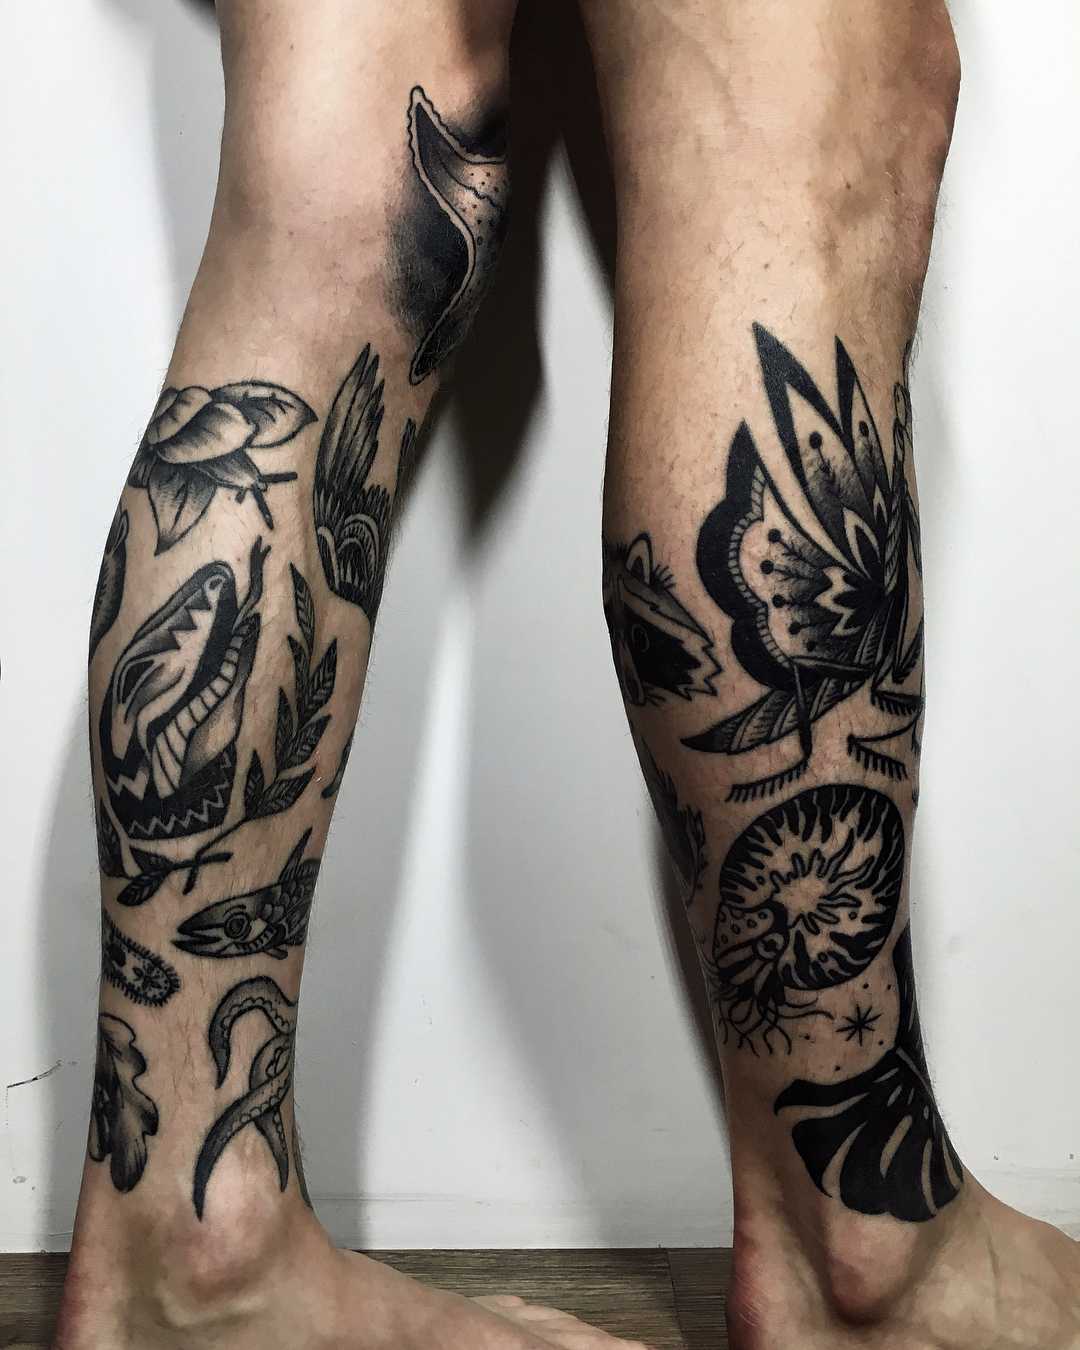 Video of the fox posted yesterday. You can see how it wraps around the side  of the calf. Leg tattoos are my favorite! Thanks for checking… | Instagram